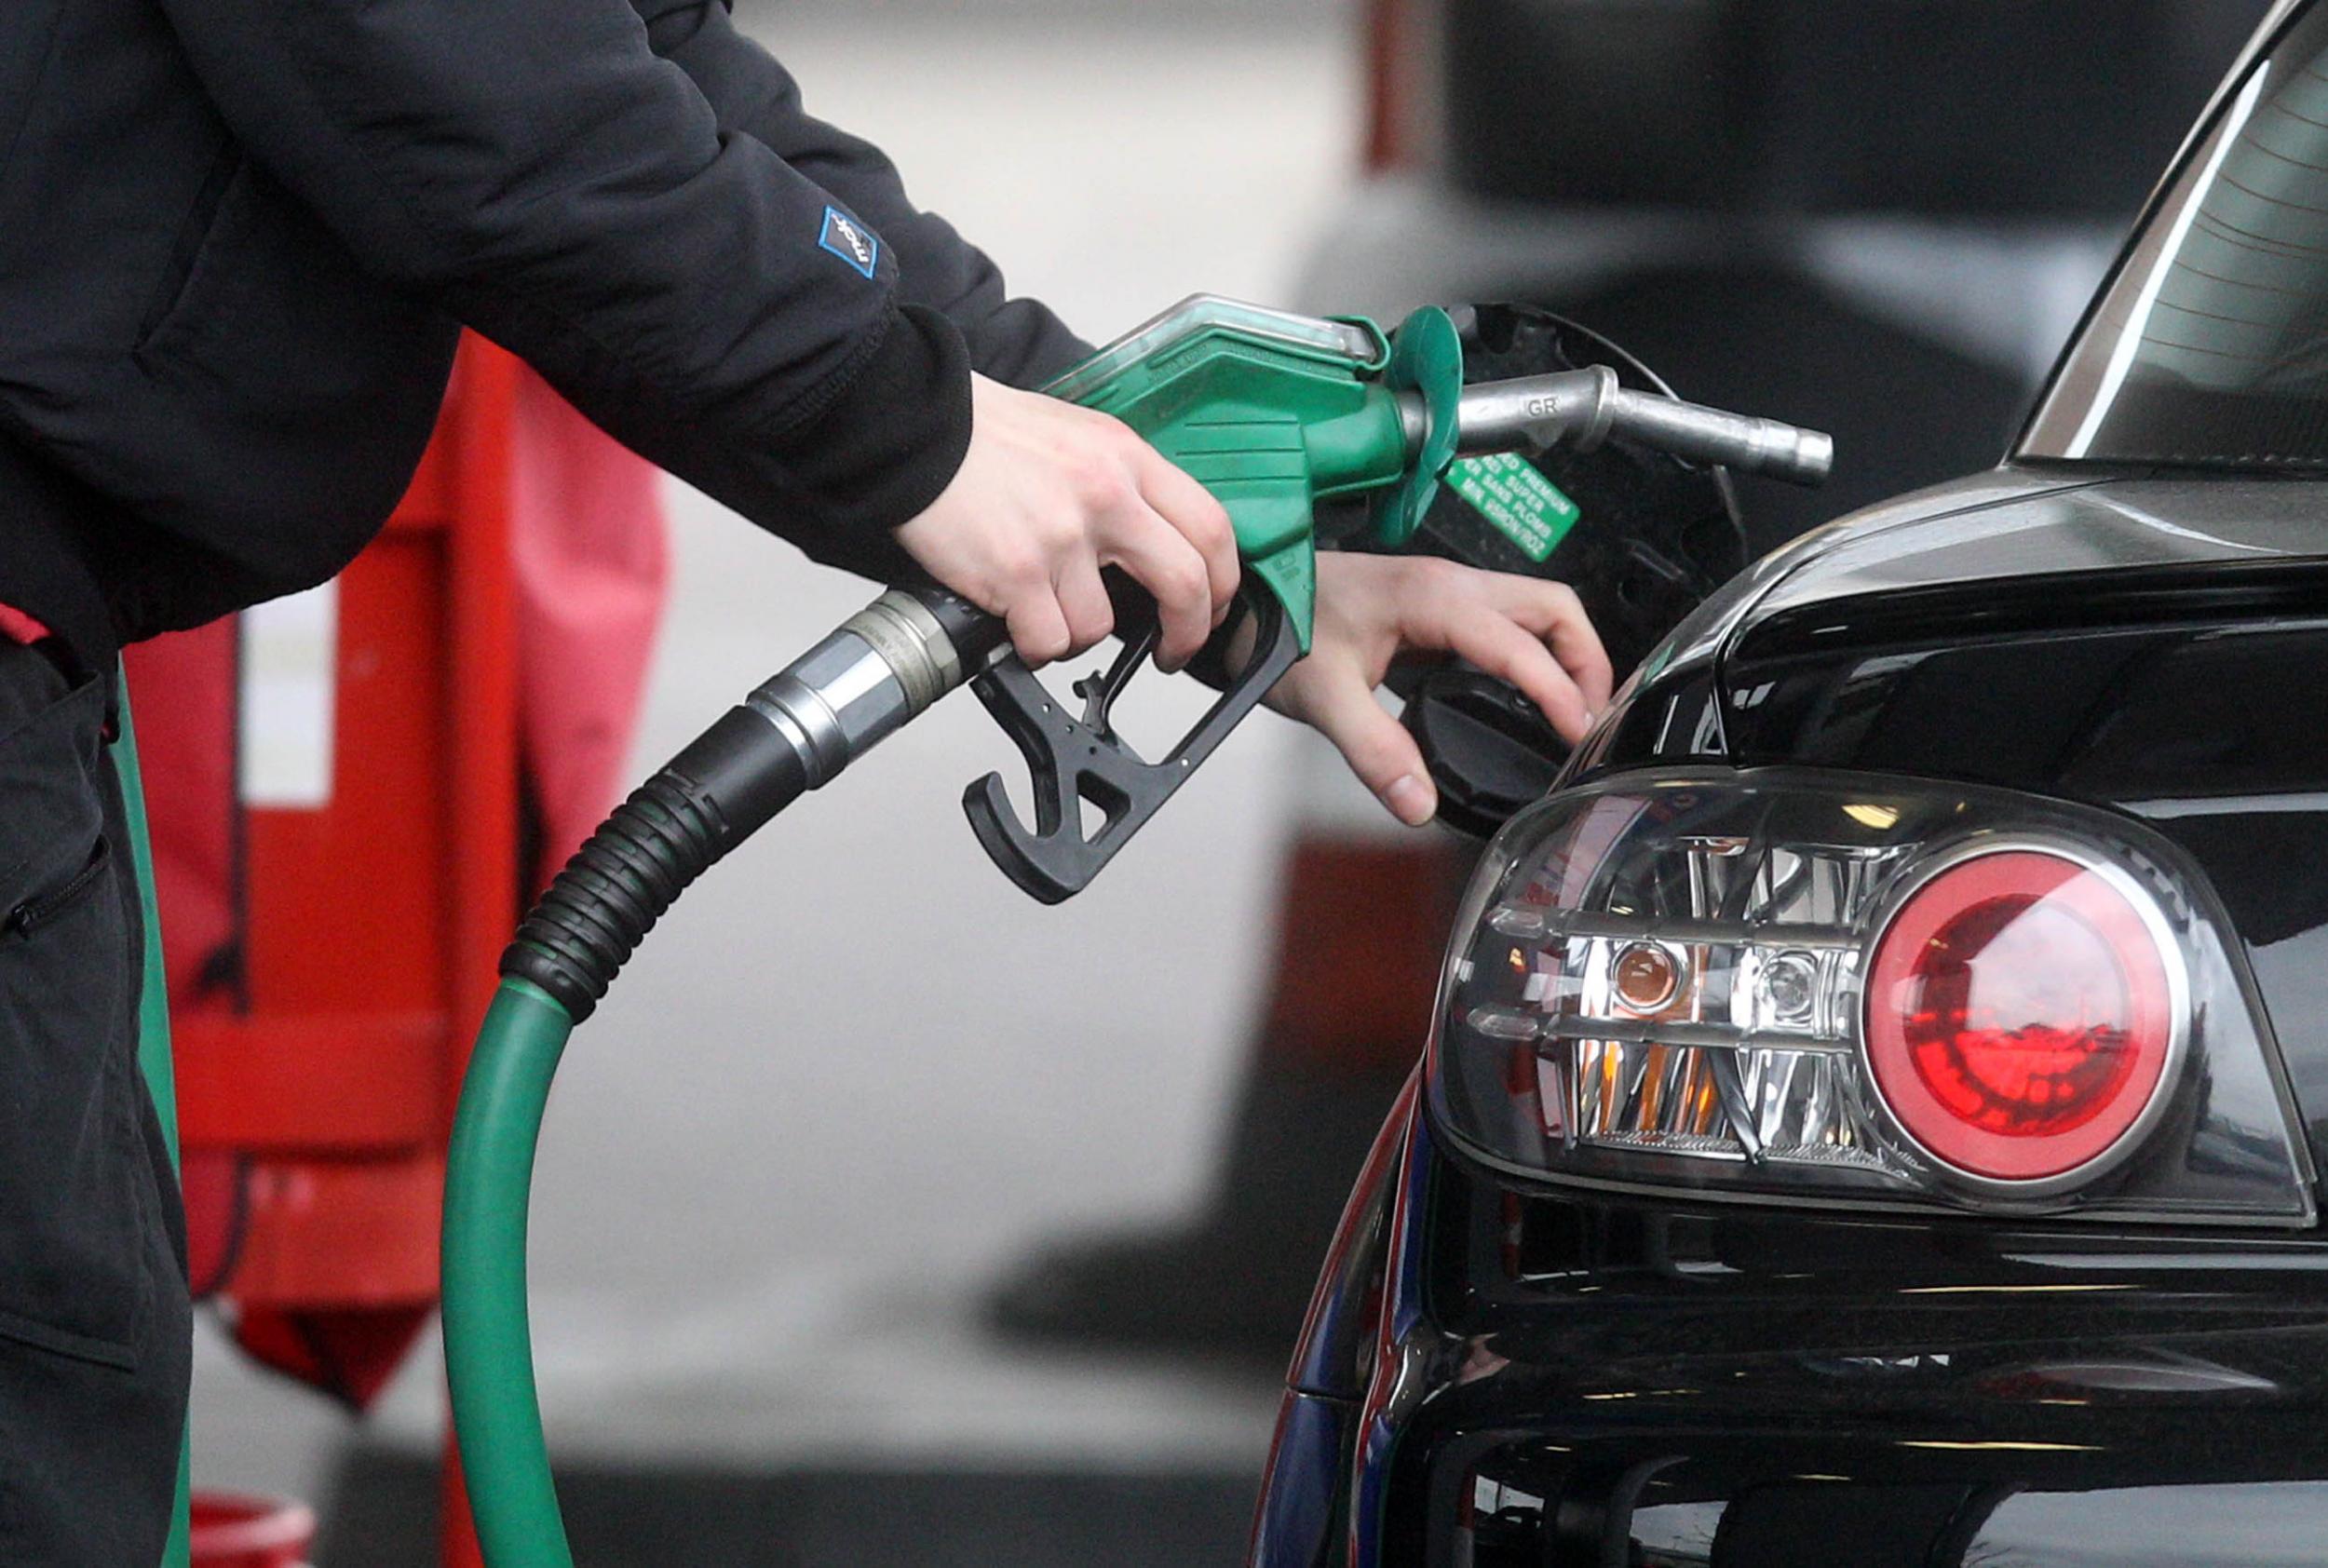 City analysts had expected rising petrol costs to push up inflation to 2.5 per cent